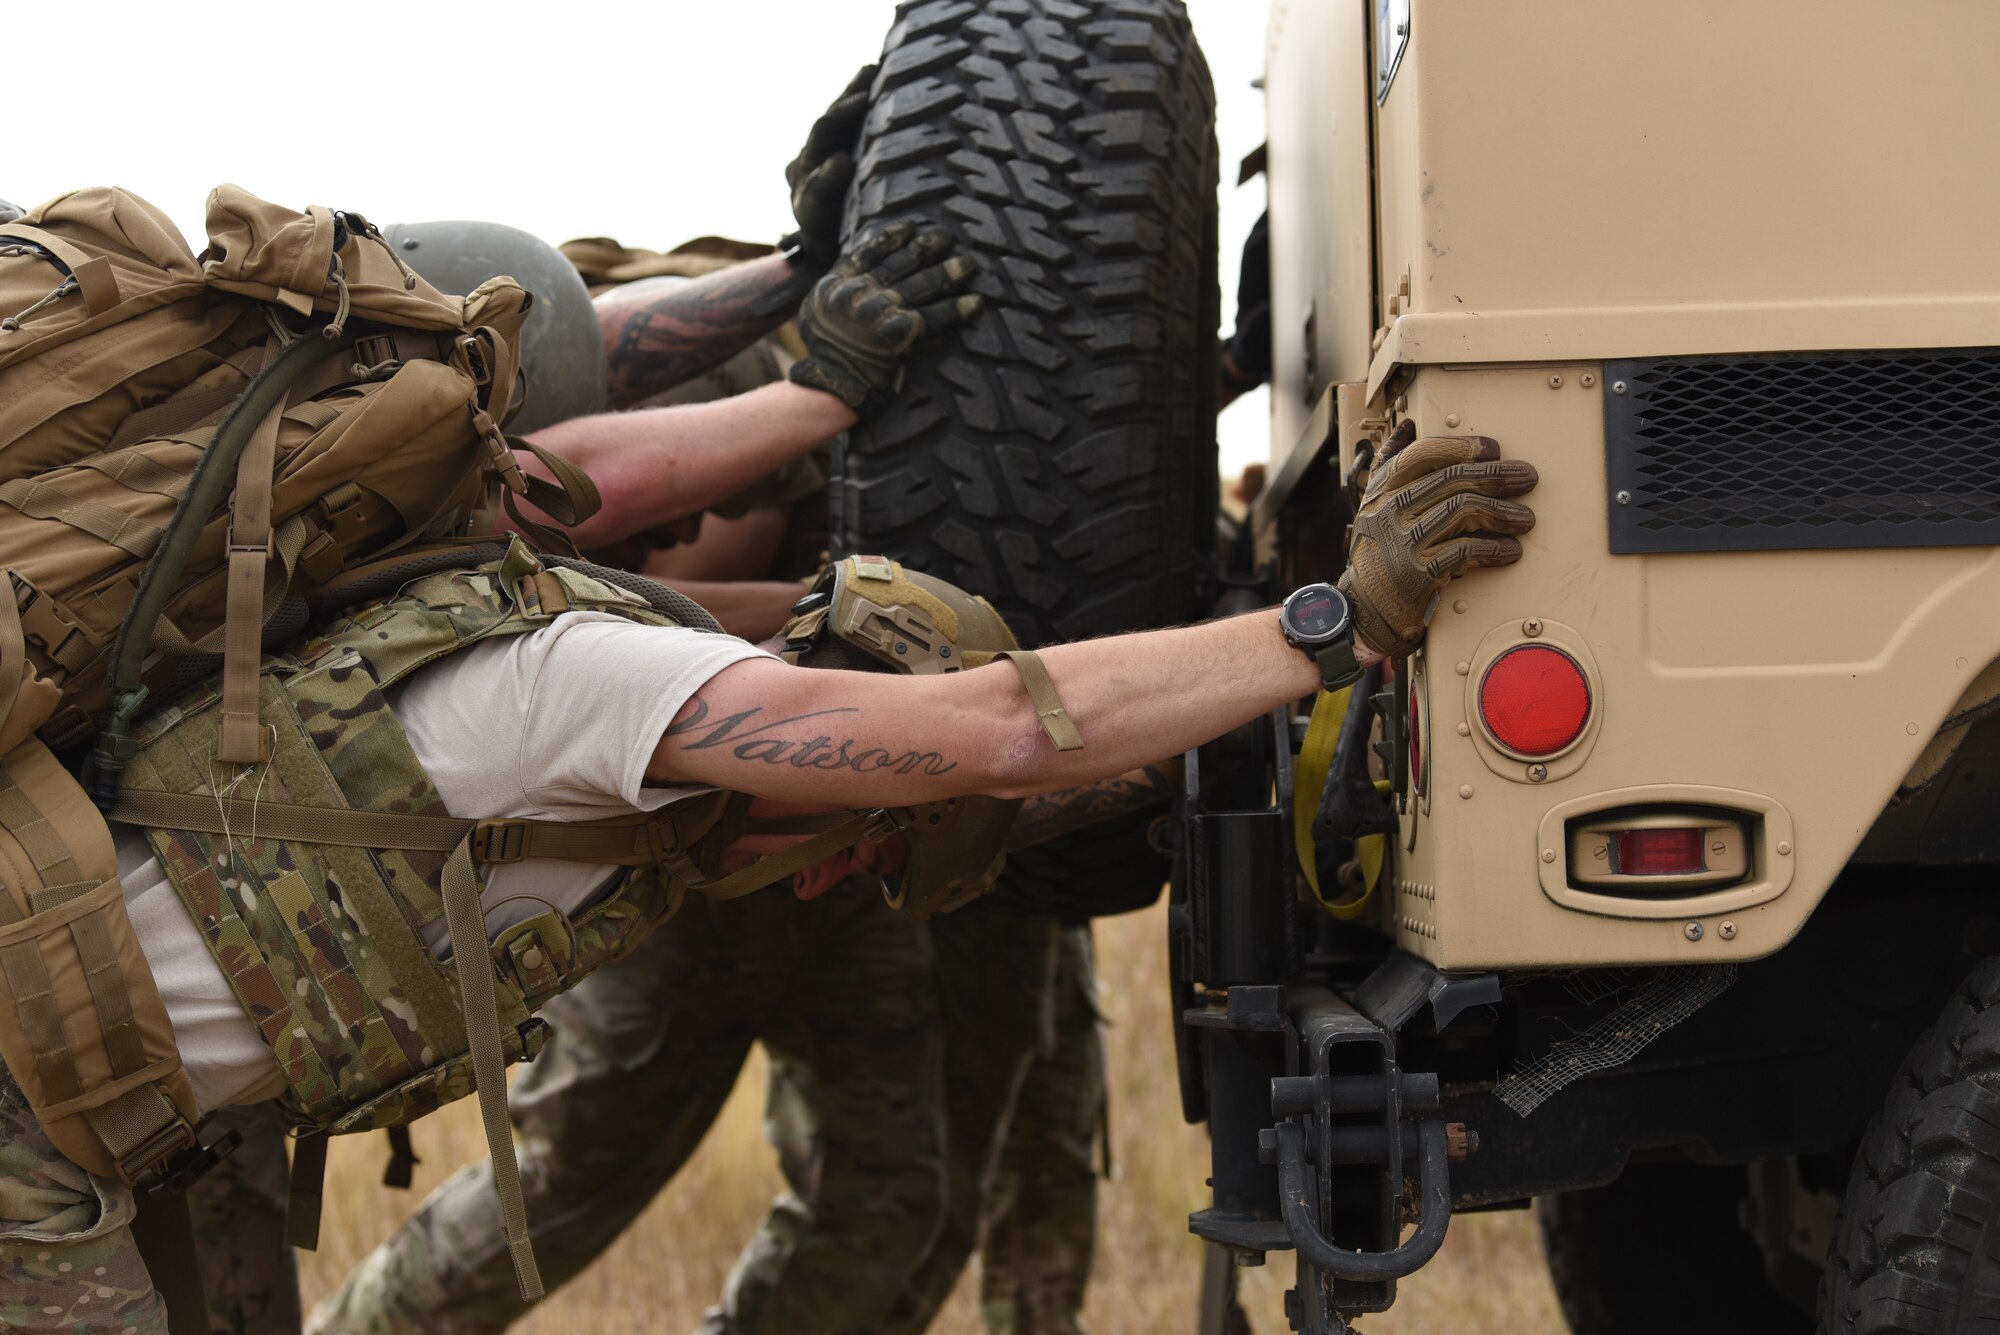 Security forces members from Team Guernsey show their strength during the HMMWV push at the annual Crow Creek Challenge Sept. 6, 2019, at F. E. Warren Air Force Base, Wyo.  They pushed the heavy vehicle down the intended path before reaching a small dip in the ground they had to overcome. After a brief moment of difficulty, they gave one final heave and got the vehicle over the small ditch to complete the task. (U.S. Air Force photo by Senior Airman Nicole Reed)